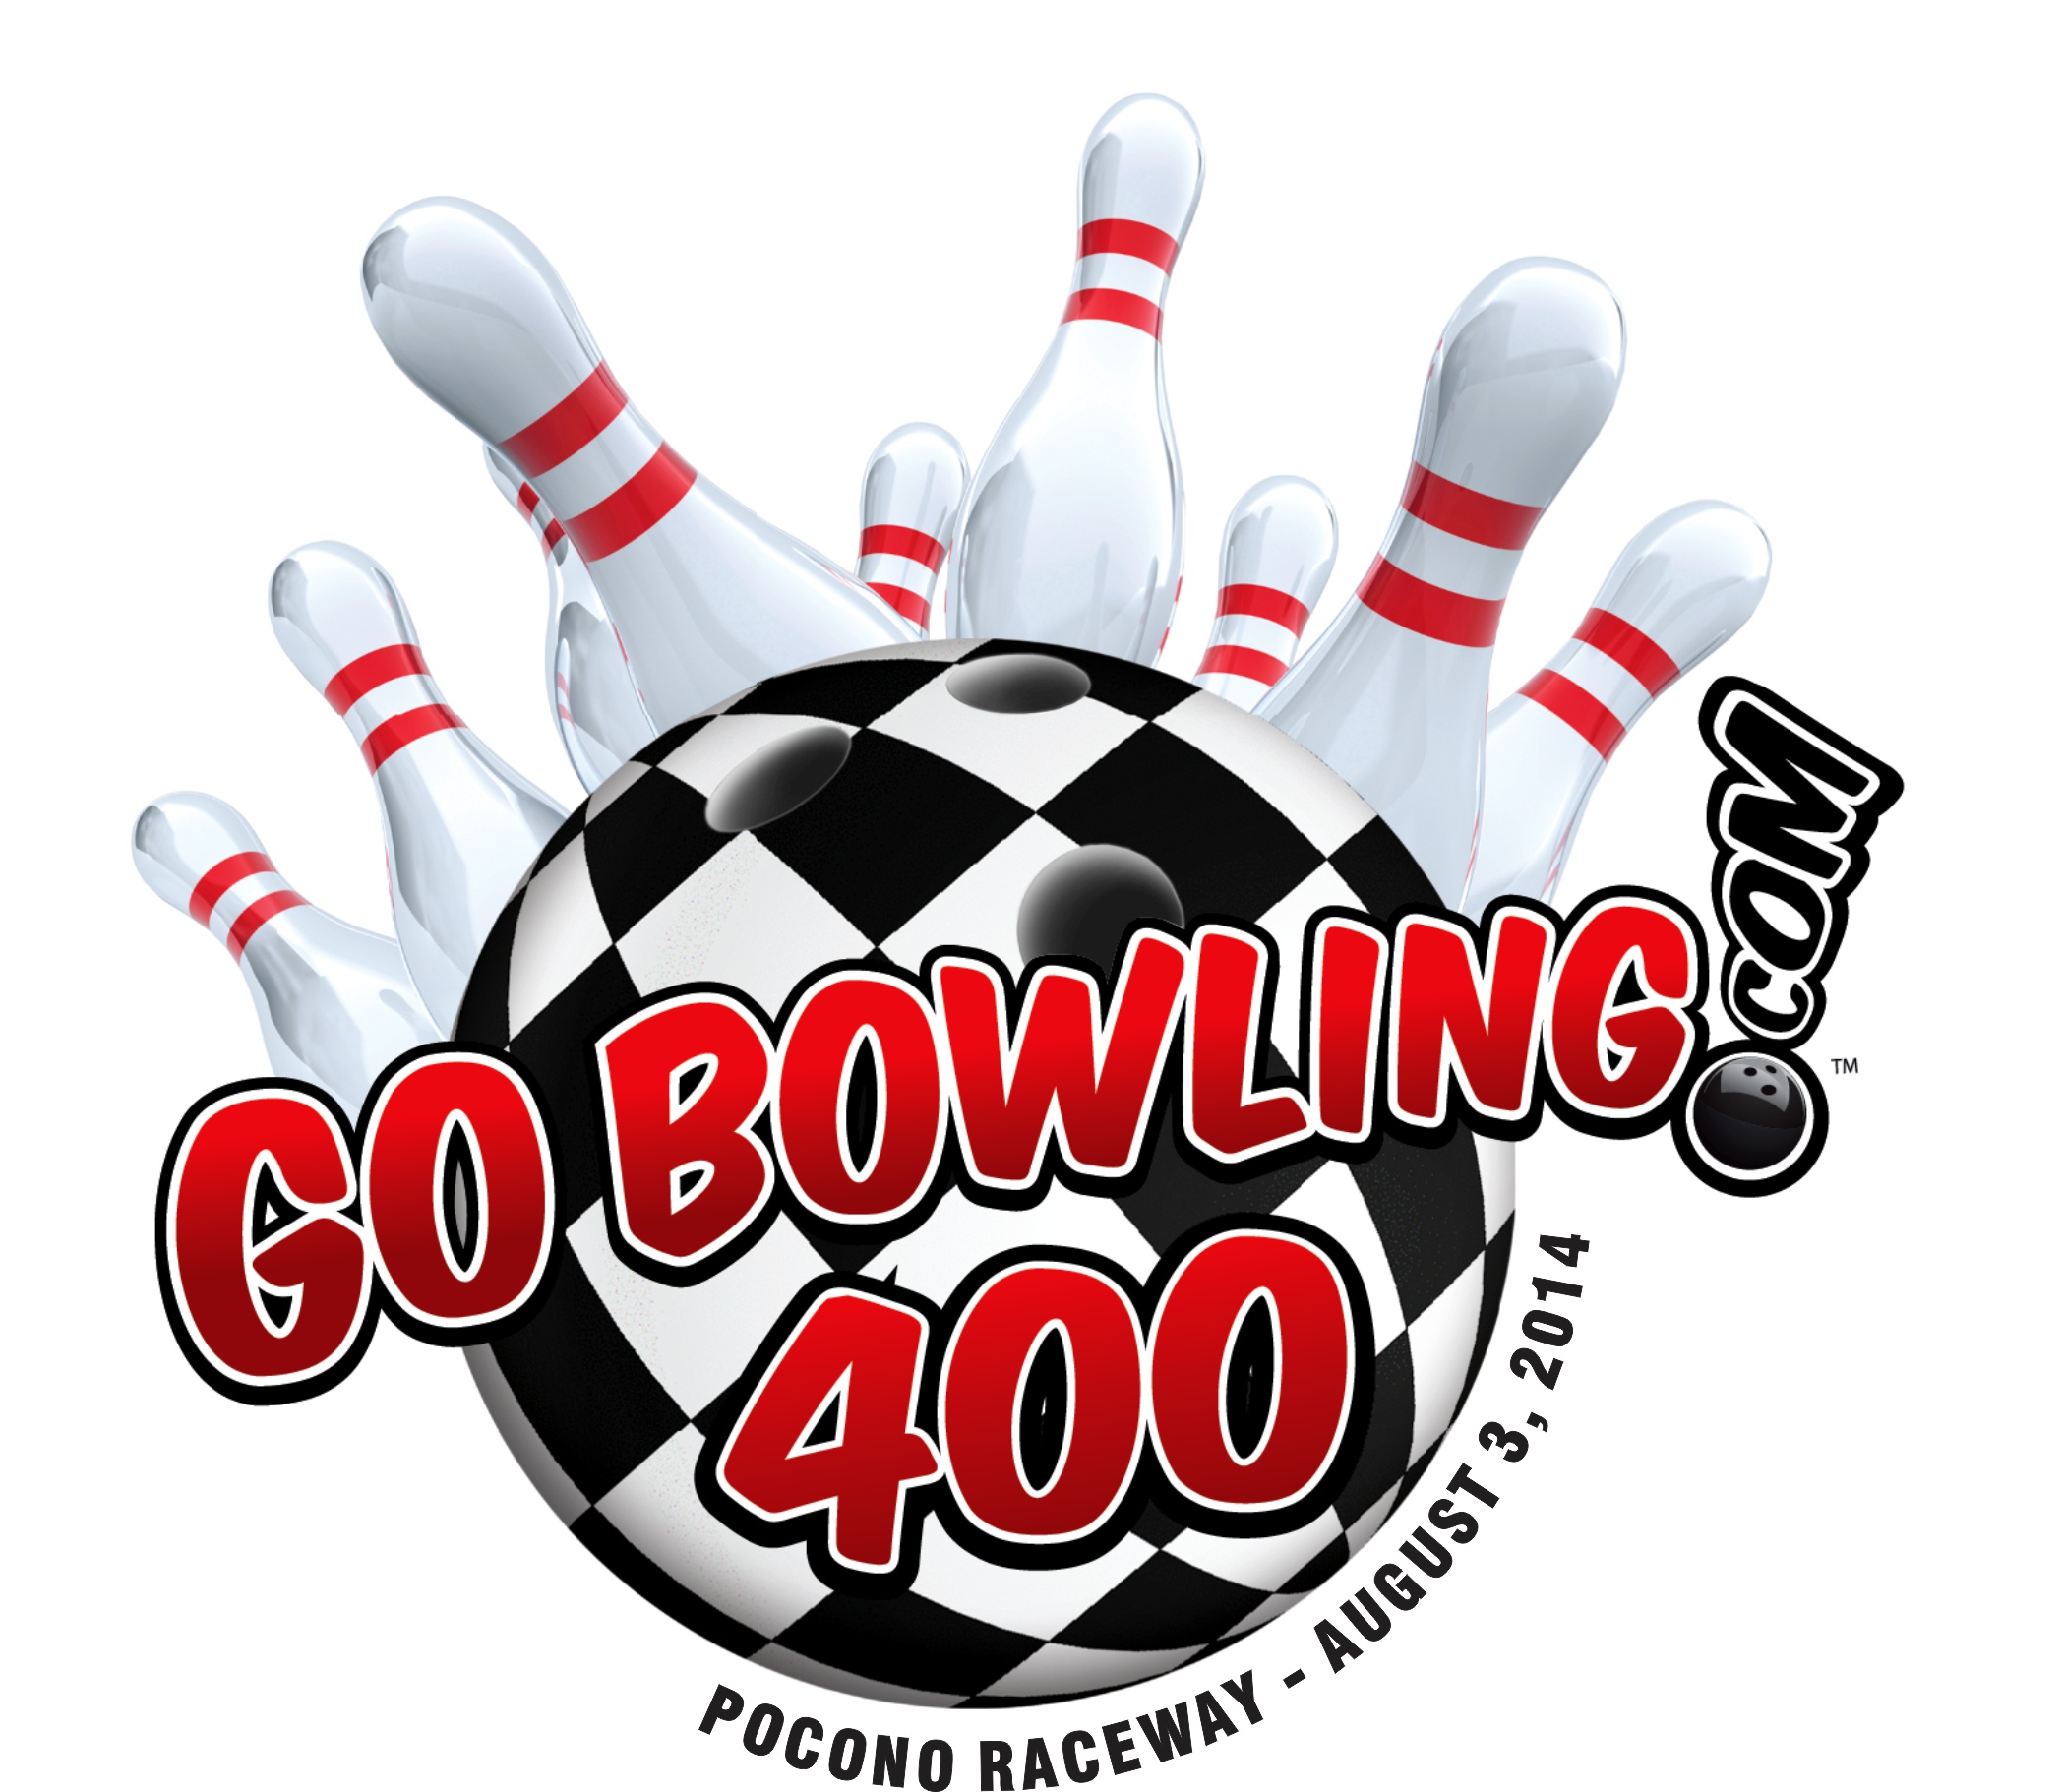 gobowling400